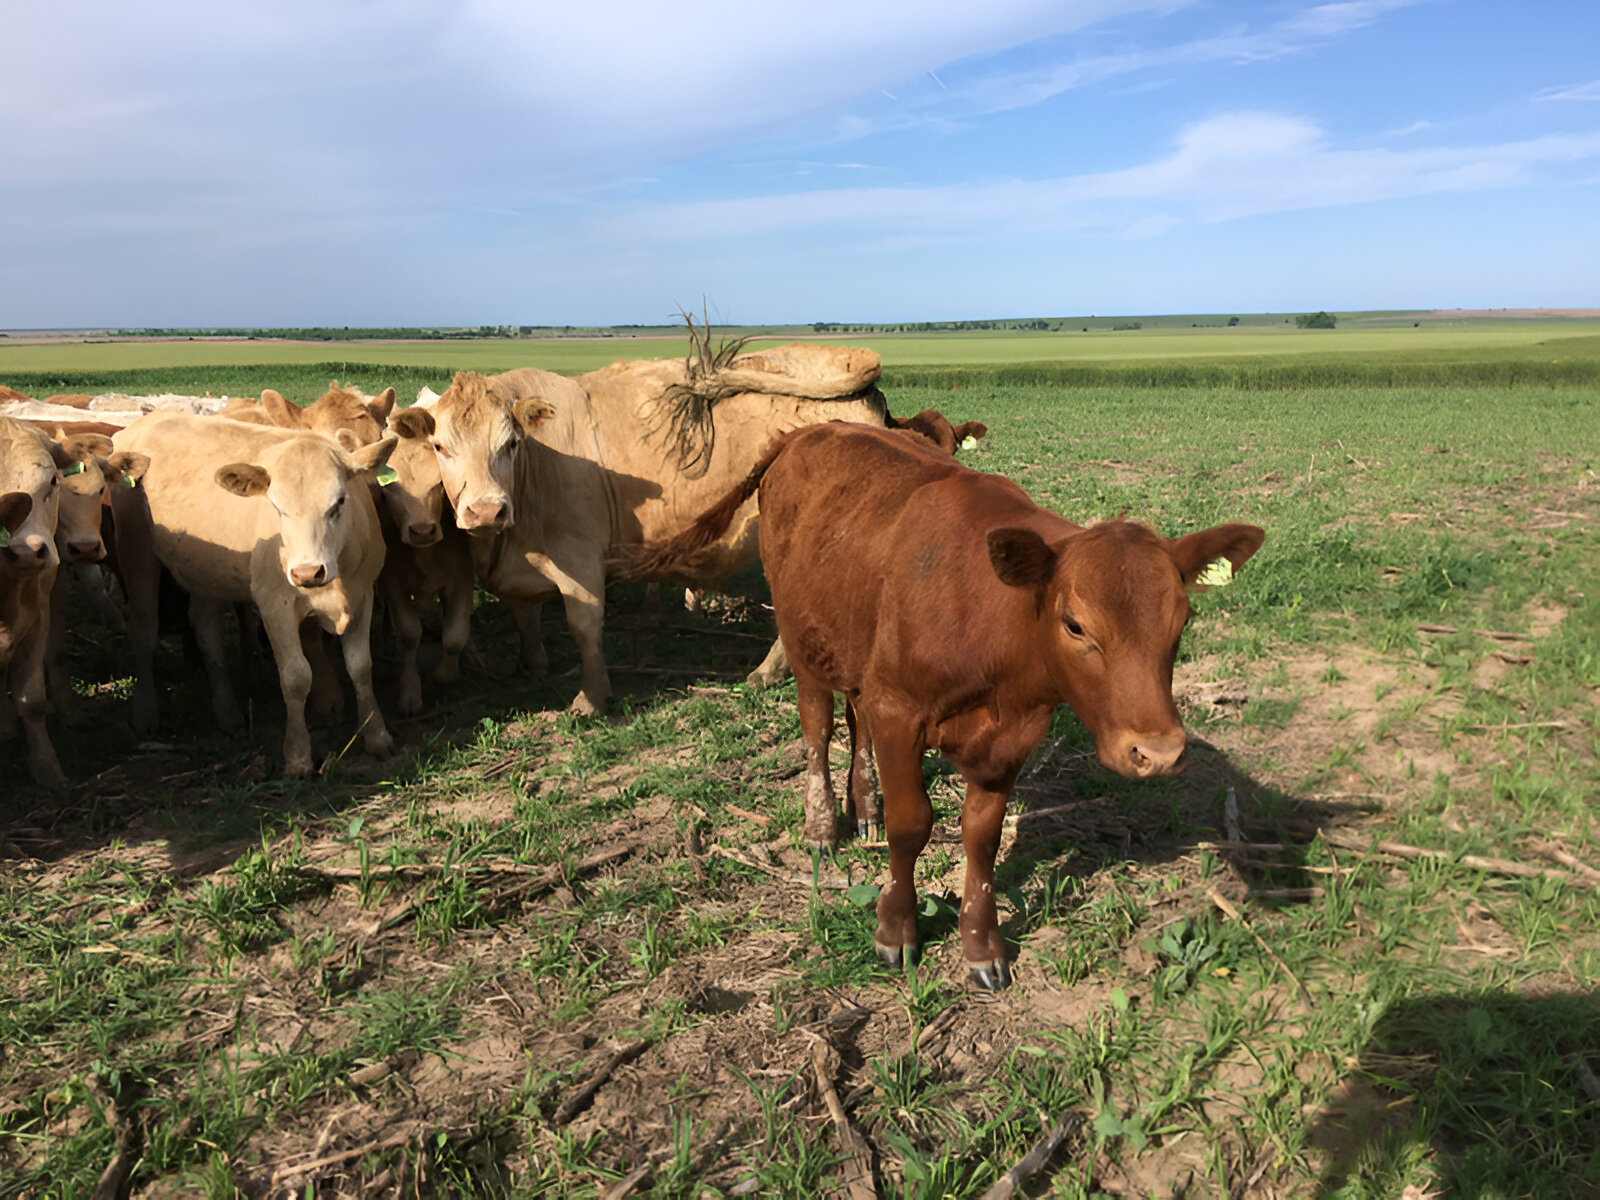 Grazing cover crops with beef cattle increases soil organic carbon stocks and potassium concentrations in grazed plots, according to a study from Kansas State University. (K-State Research and Extension news service)